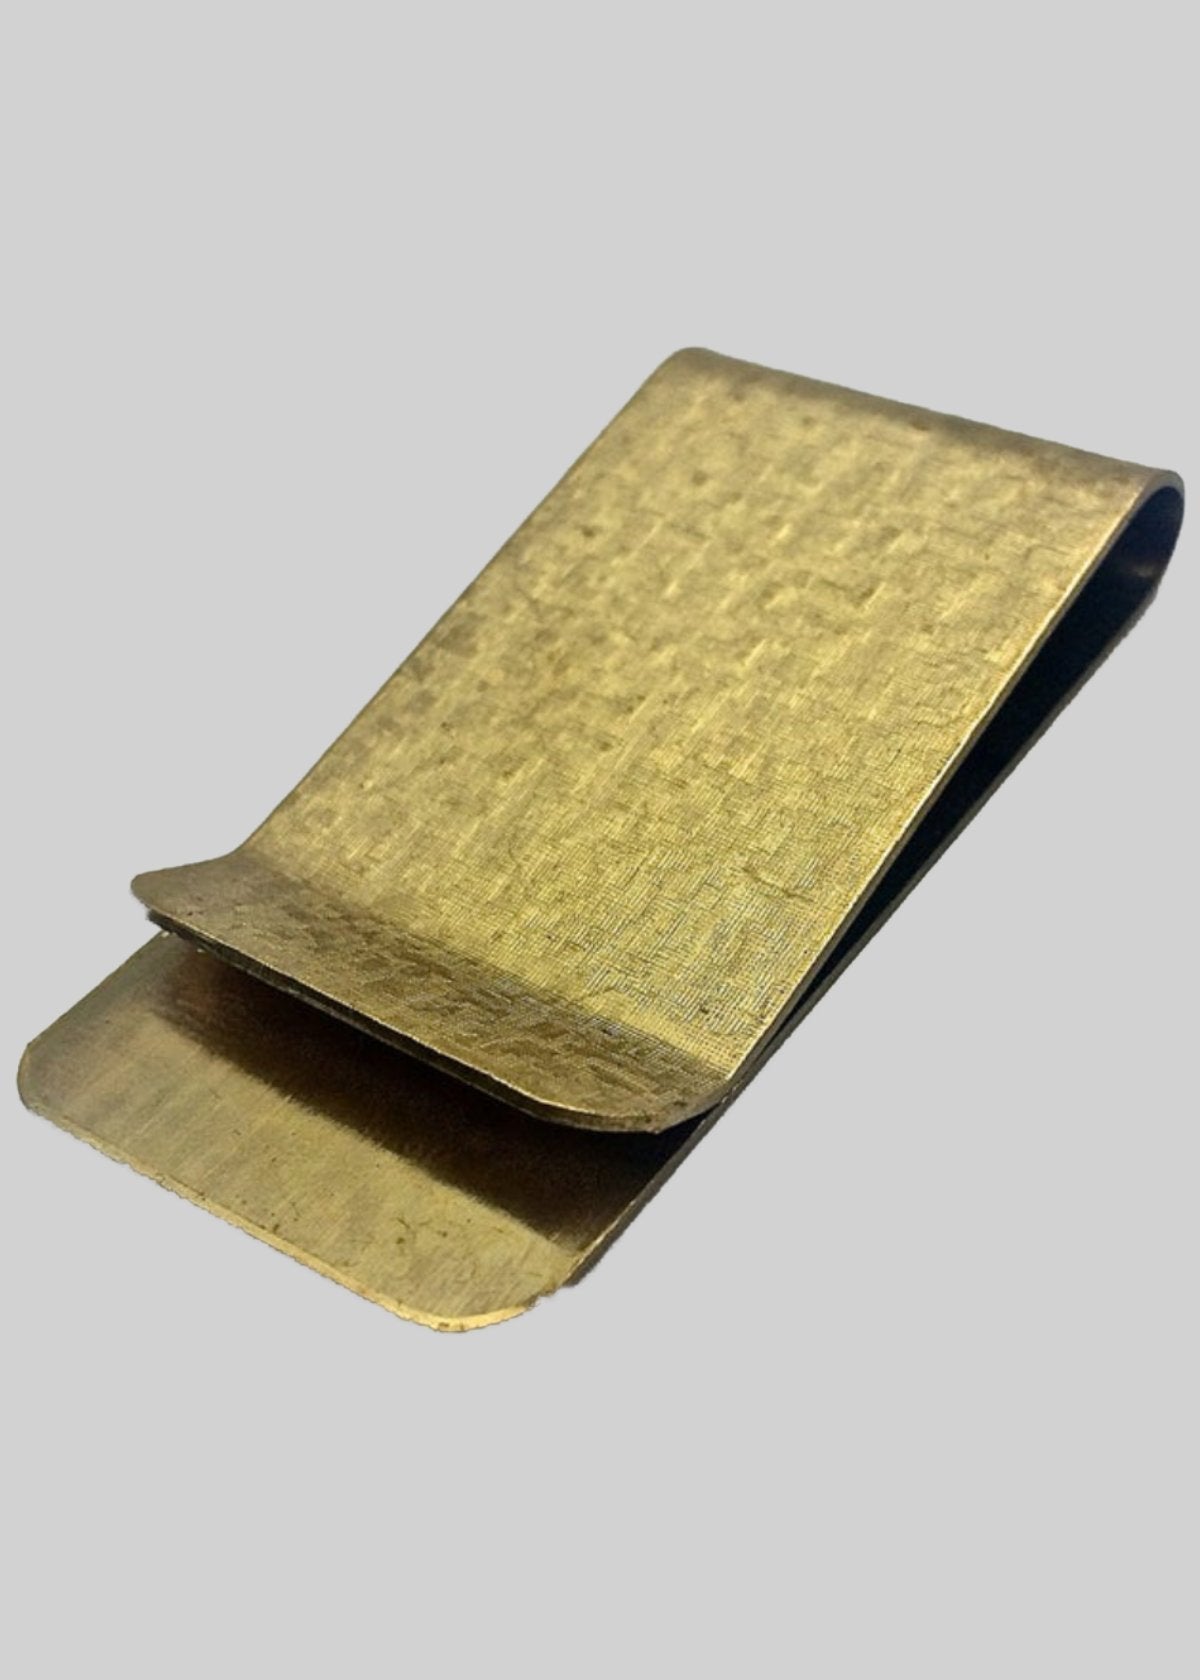 vintage style money clip in a gold tone